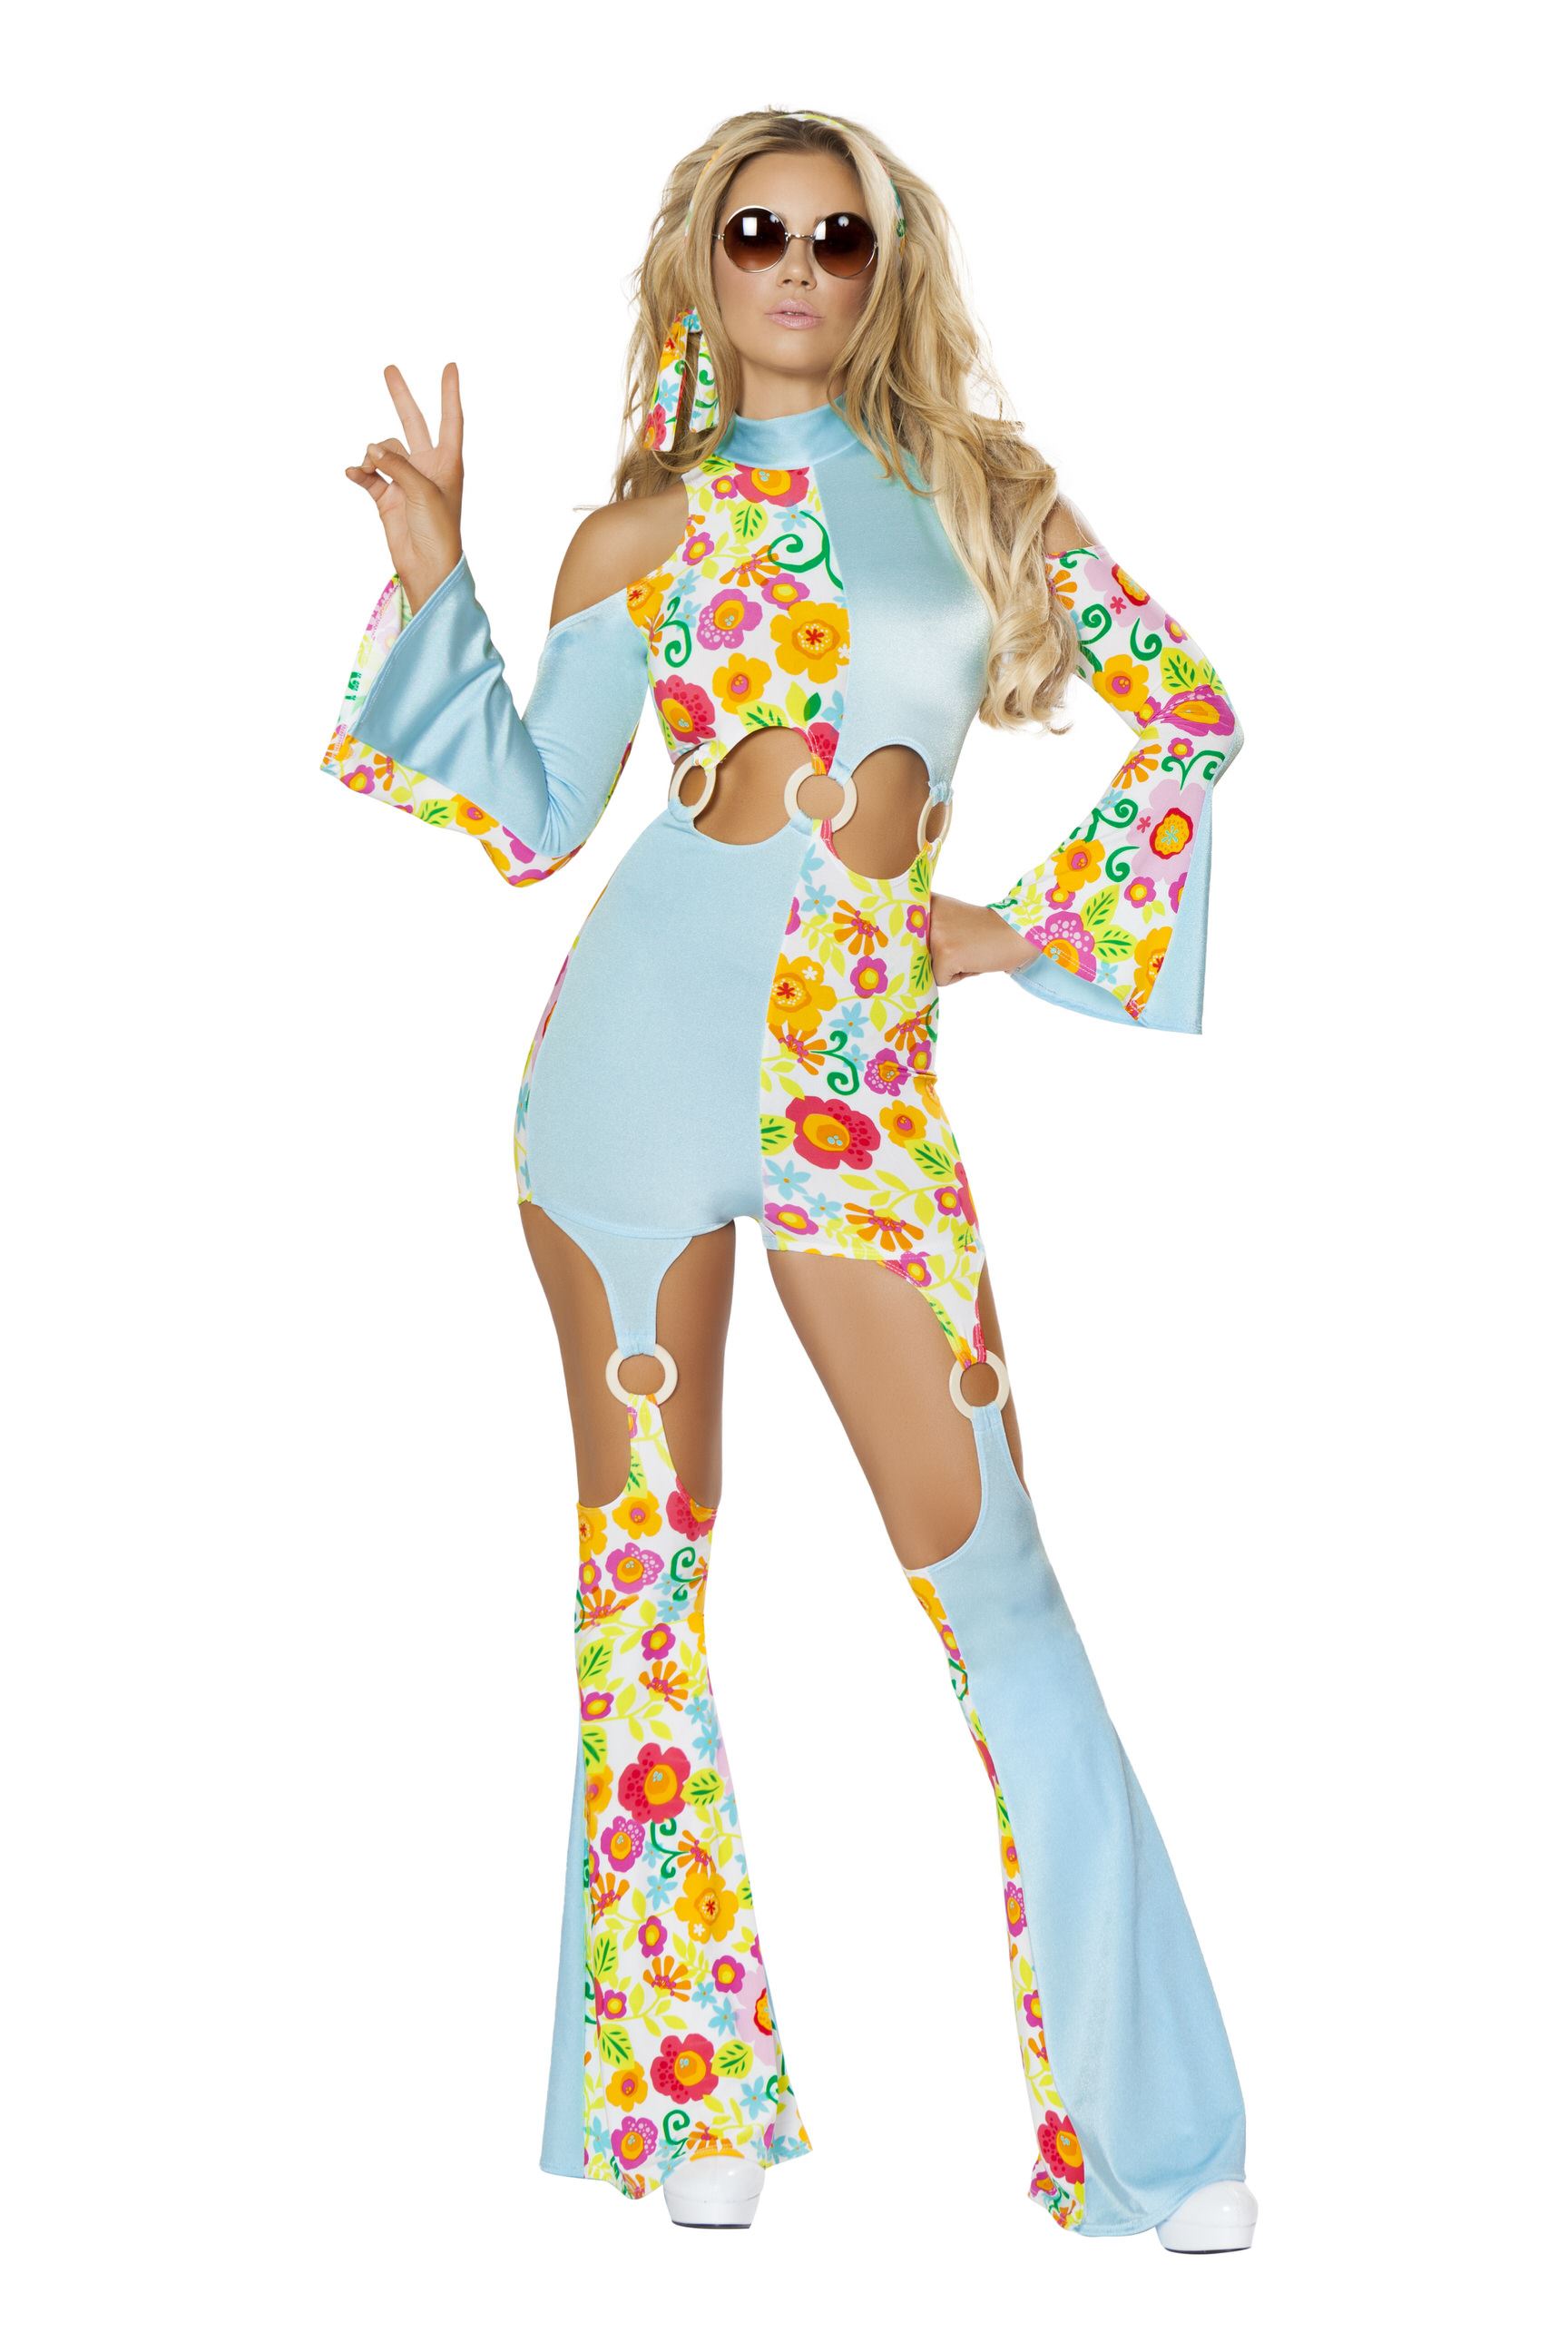 Adult Radical Hippie Woman Costume | $75.99 | The Costume Land